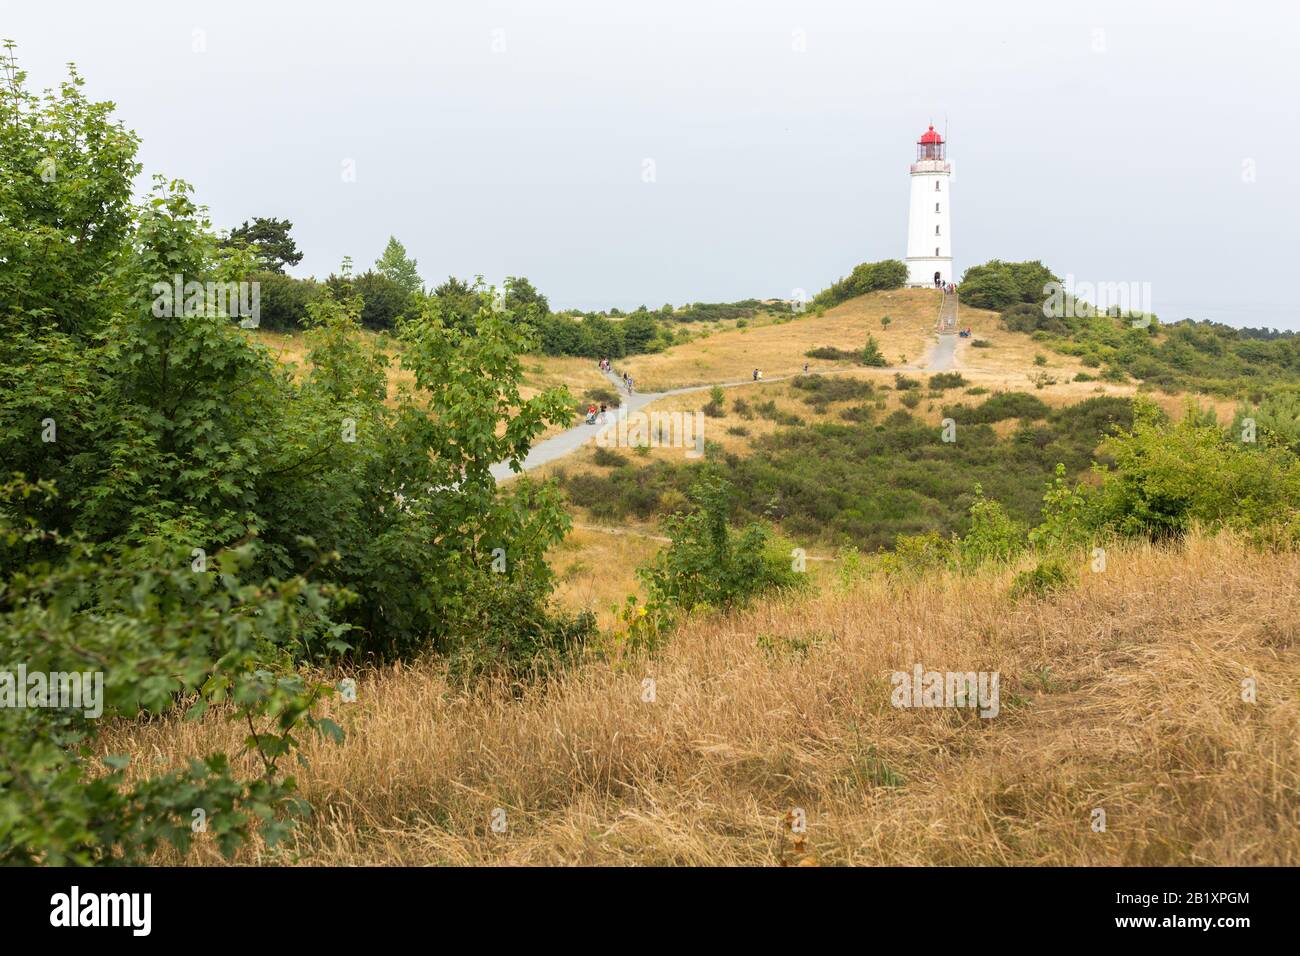 Dornbusch lighthouse on Hiddensee island. Bushes and grassland in the foreground. The lighthouse started ist operation in the year 1888. Stock Photo